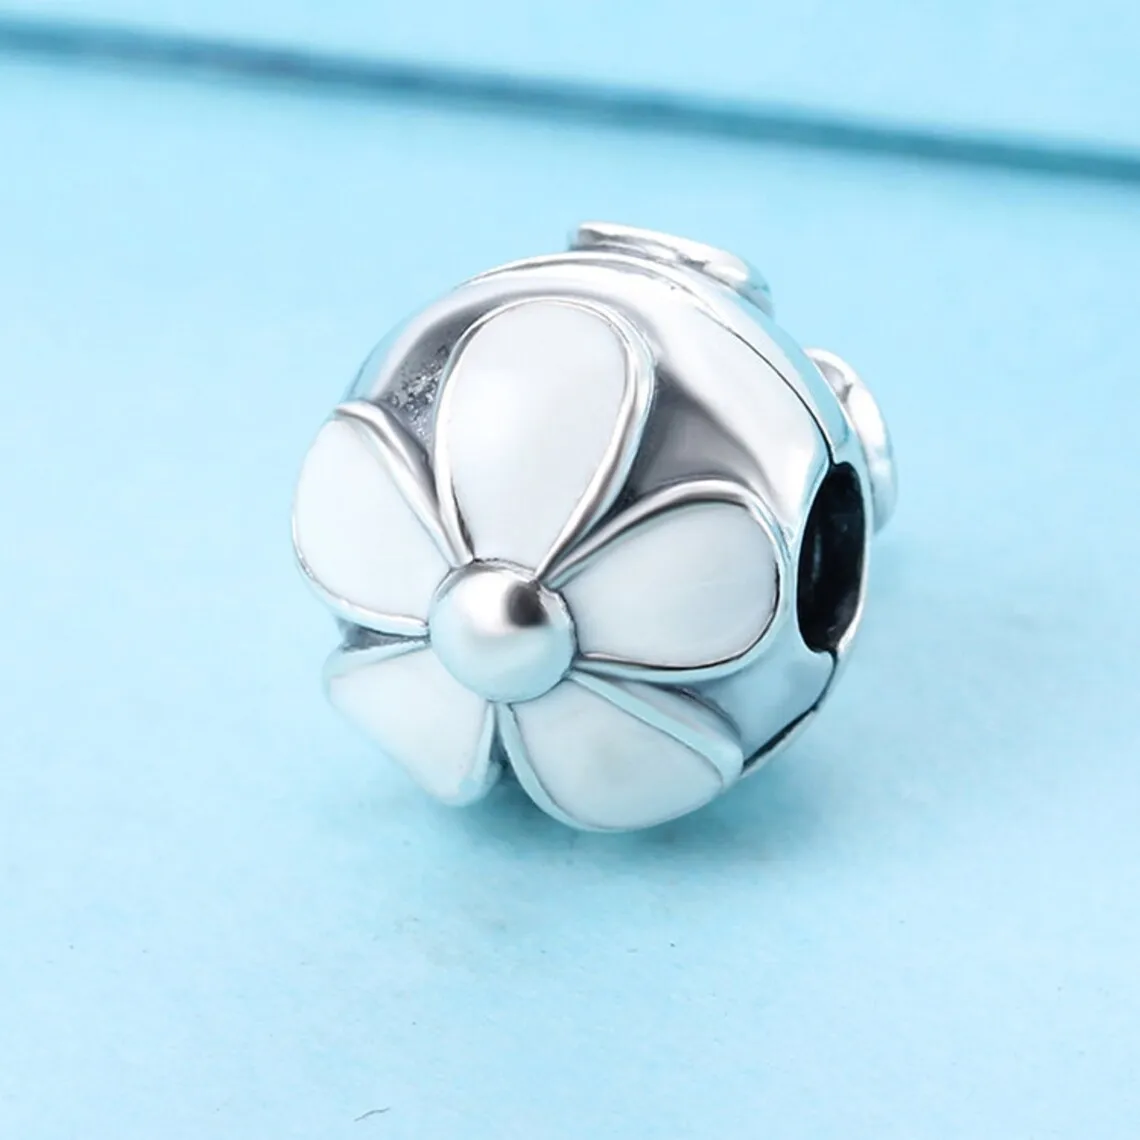 

925 Sterling Silver Darling Daisies Clip Charm With White Enamel Bead Fits European DIY Style Bracelets Necklaces